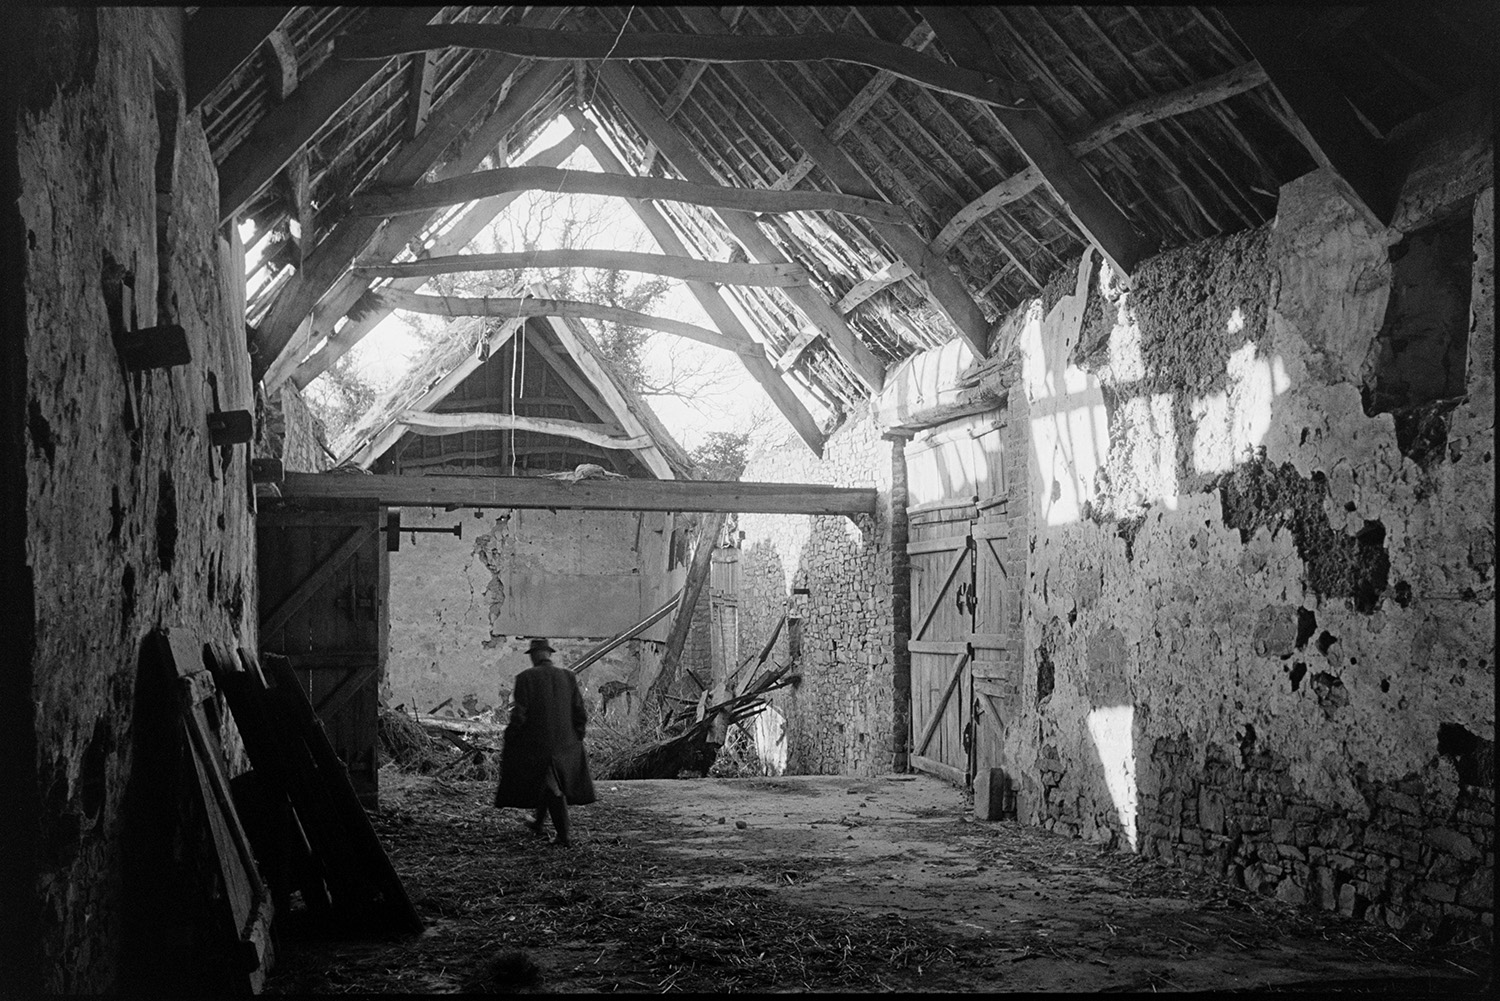 Collapsed cob and thatch barn fallen oak beams. Now restored by new owners.
[Interior of a cob and thatch barn with a collapsed roof, exposing oak beams, and partially collapsed walls, at Colleton Manor, Chulmleigh. A man is standing at one end of the barn. The barn was later rebuilt.]